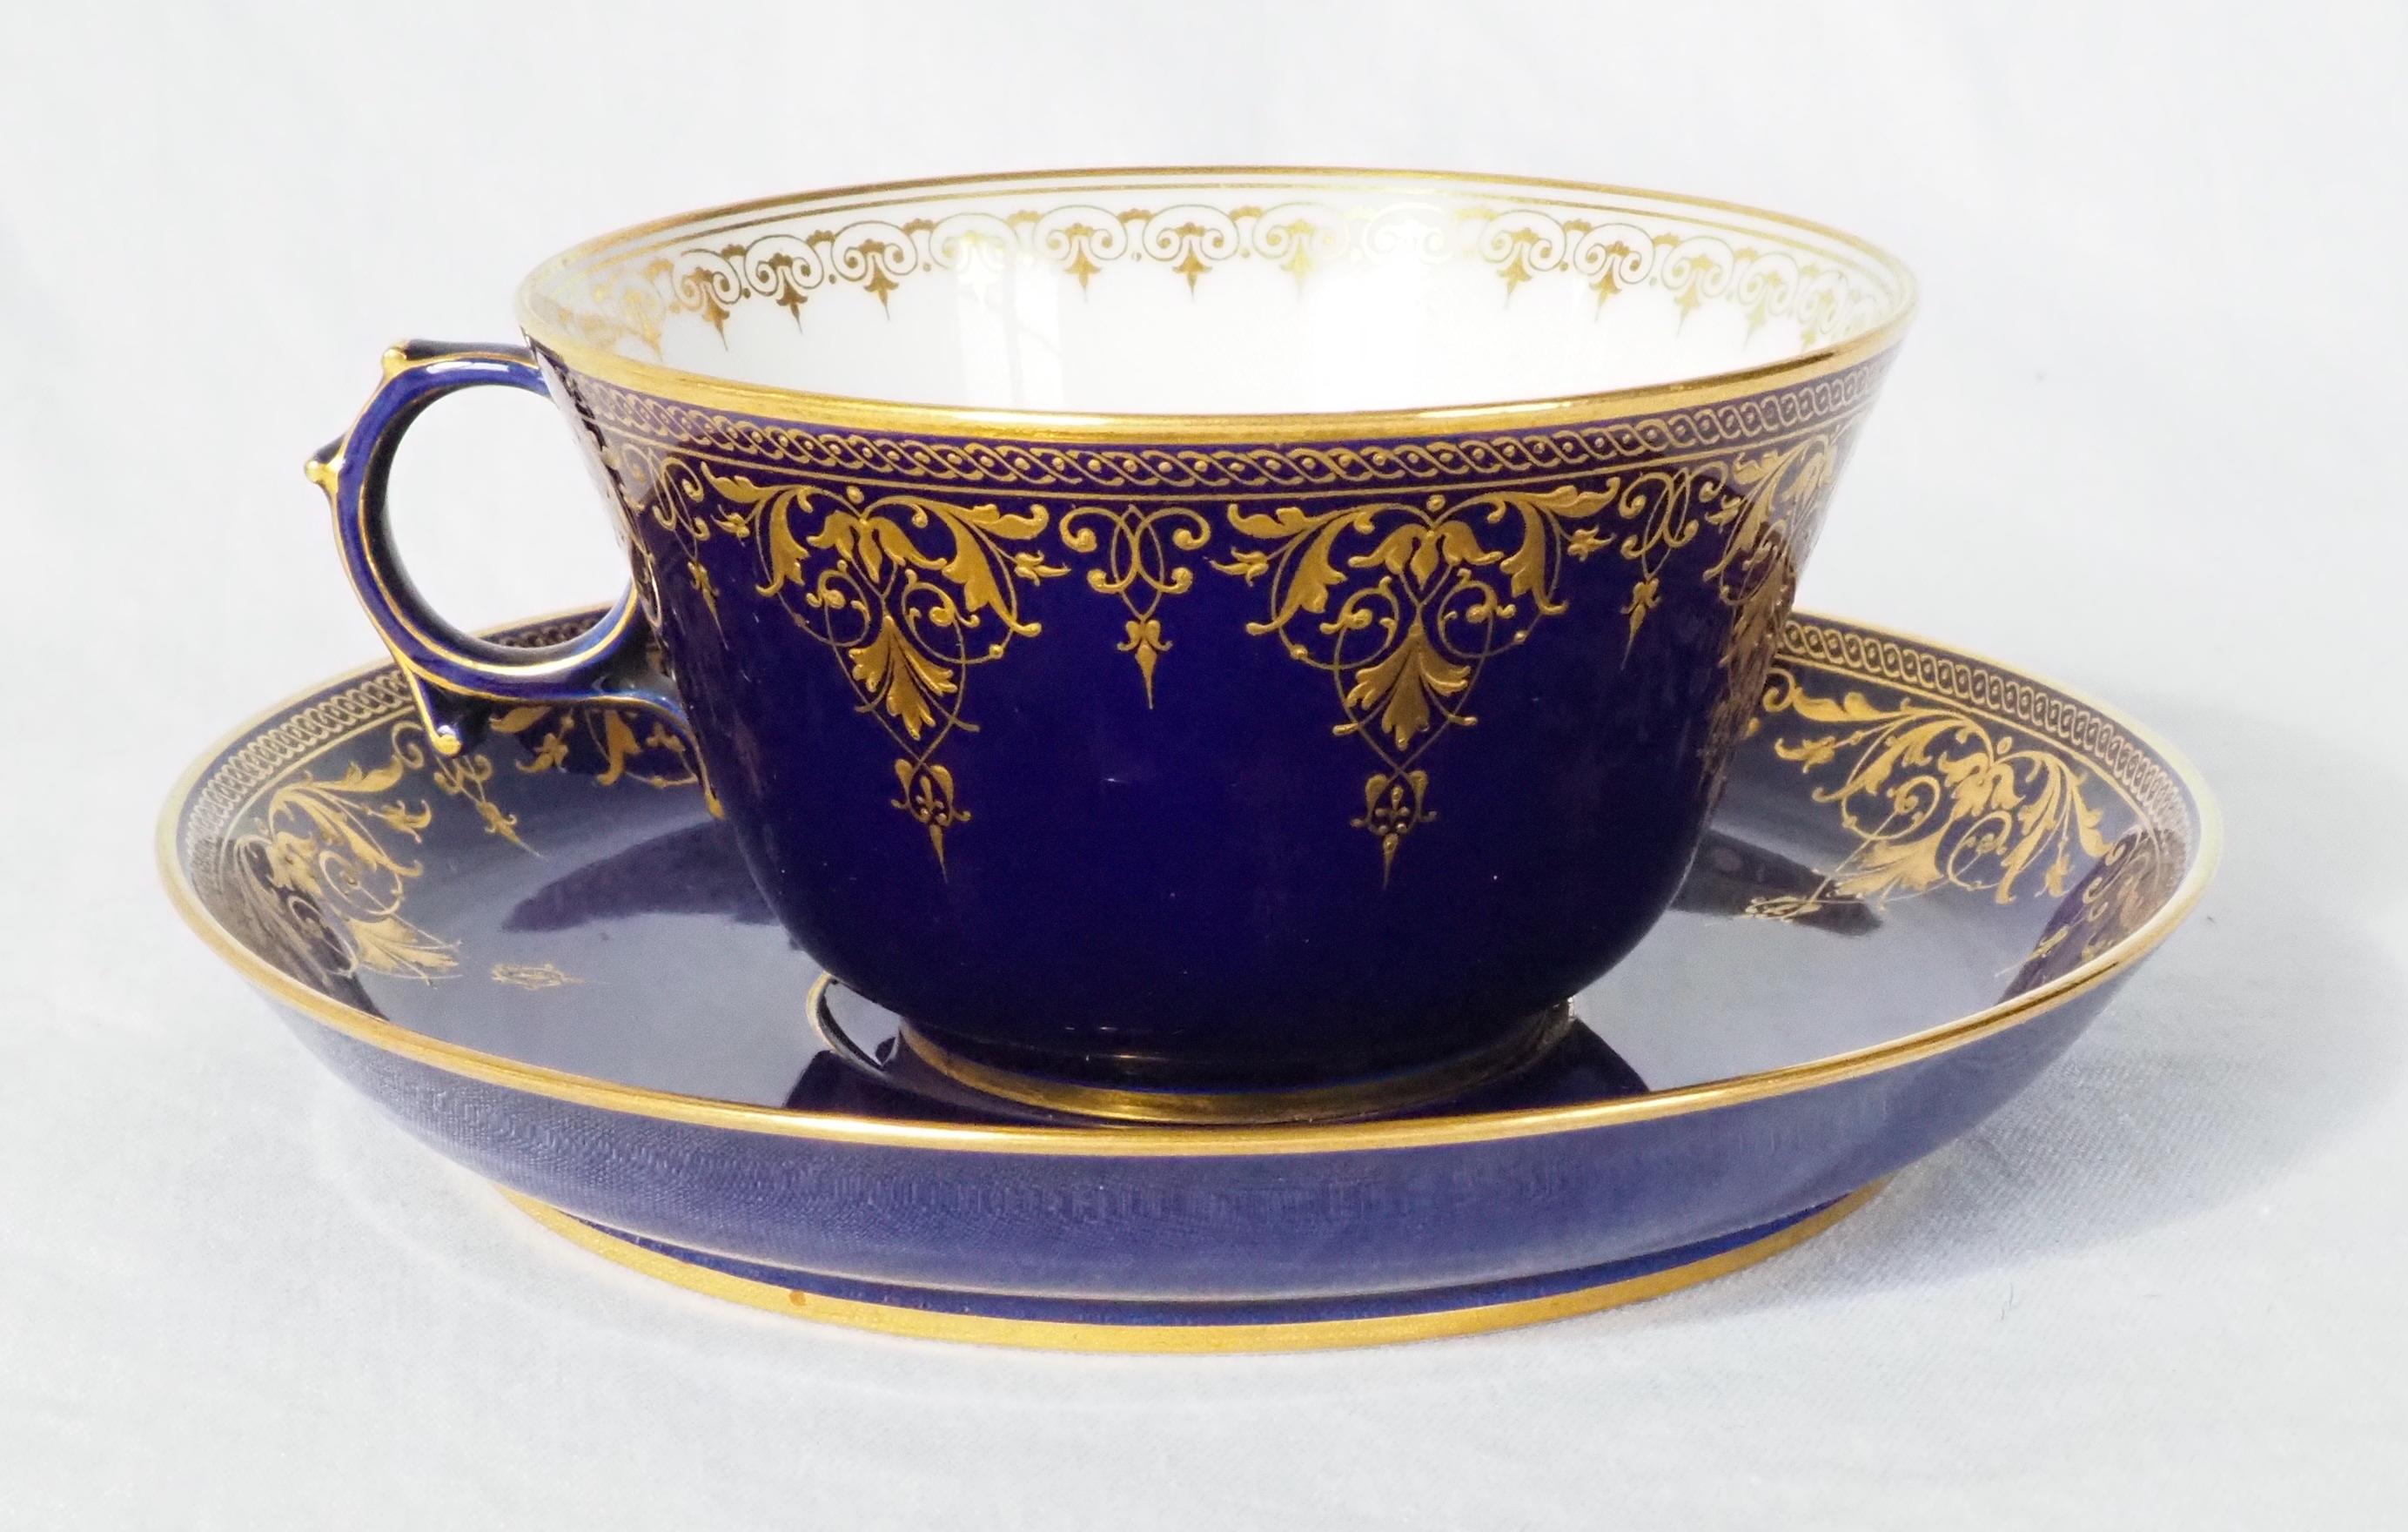 Beautiful porcelain tea cup / large coffee cup and its saucer by Manufacture Nationale de Serves.

Both pieces are decorated with fine gold Louis XVI style gilt patterns - friezes, acanthus, lambrequins - on a so-called 